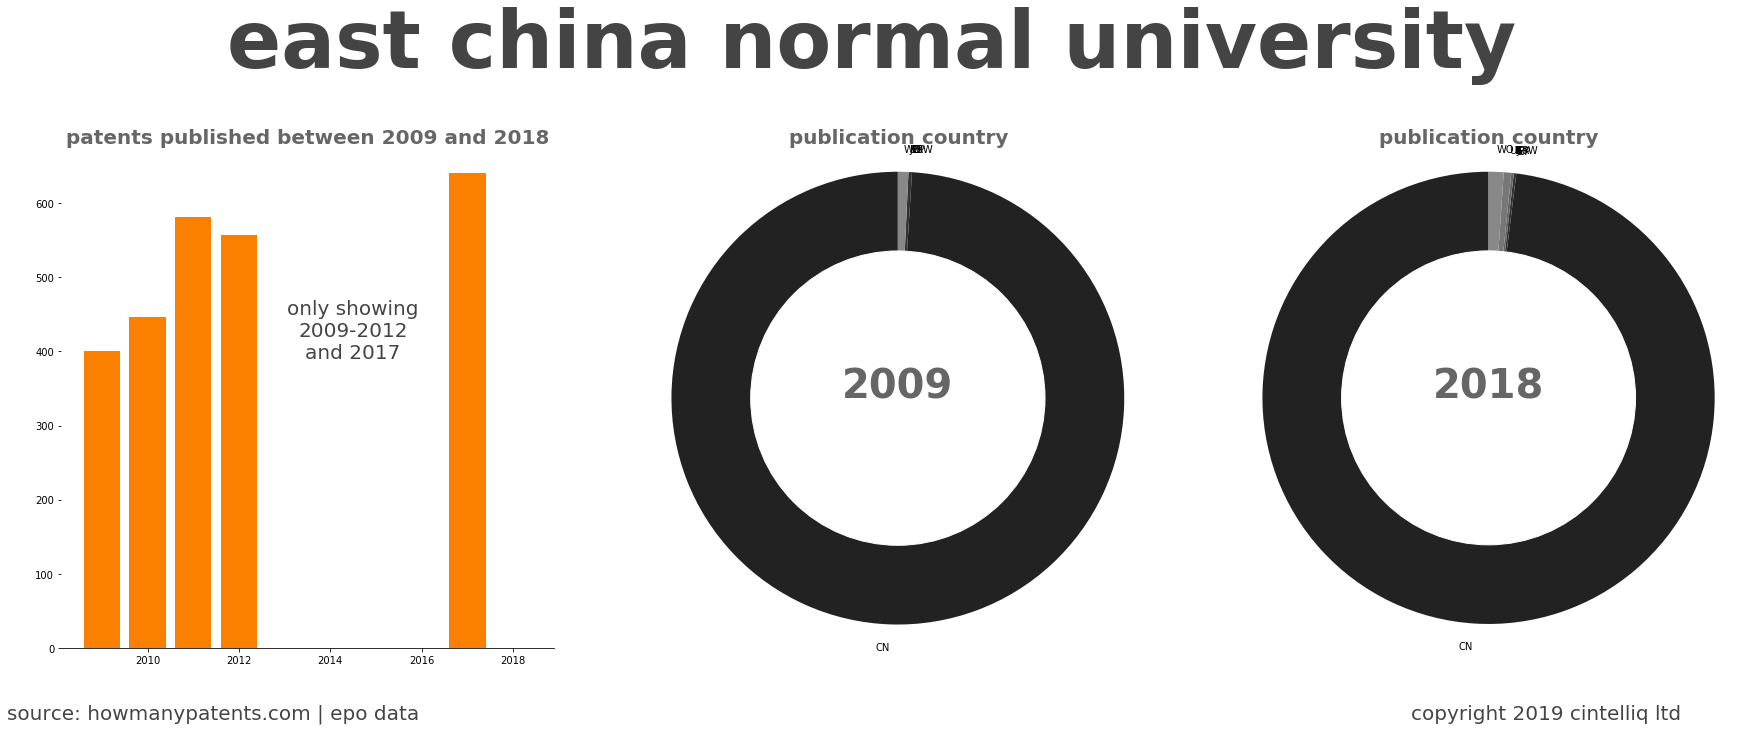 summary of patents for East China Normal University